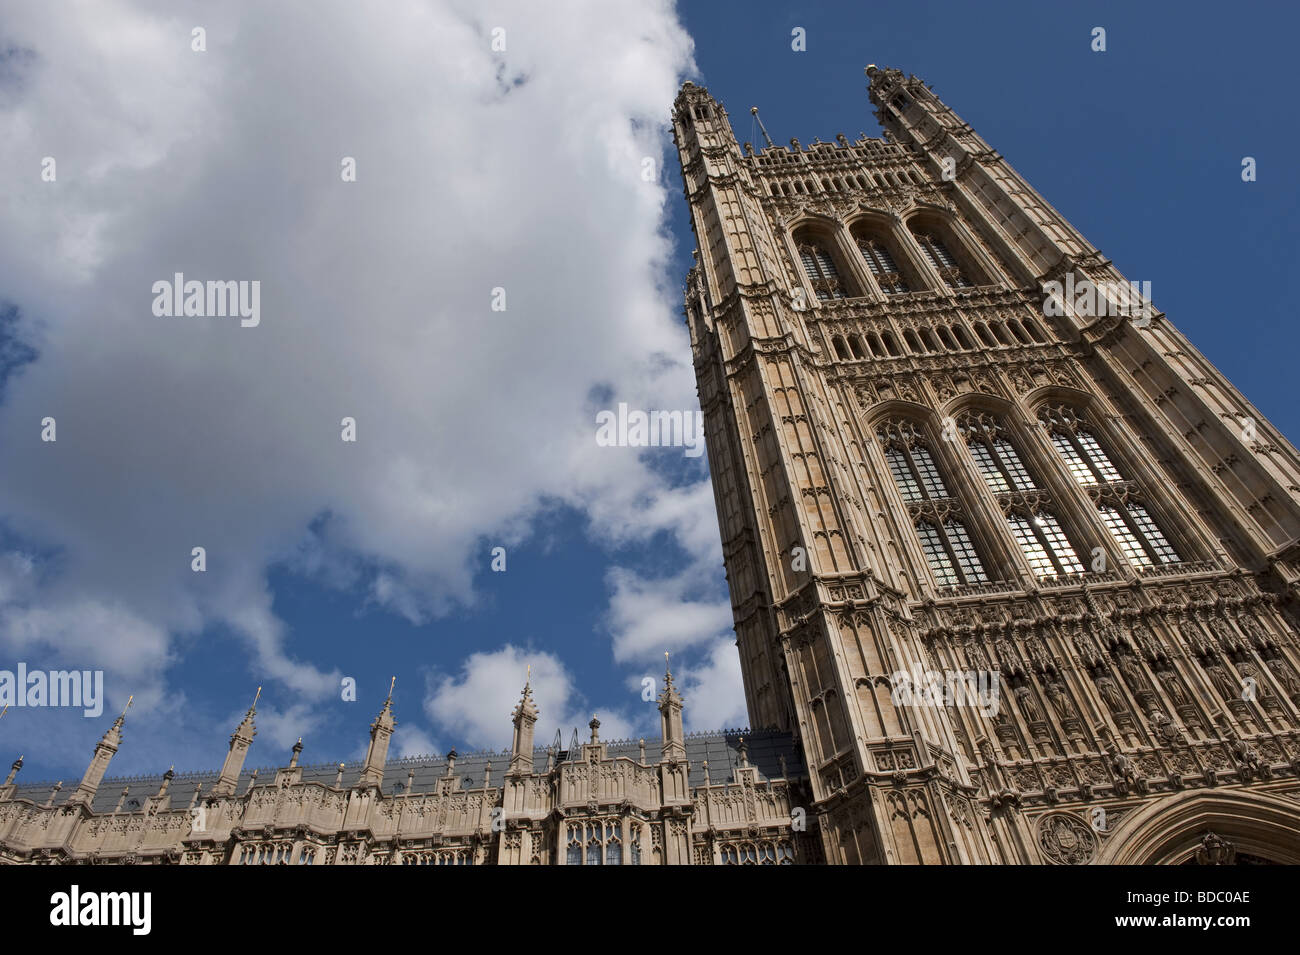 Close up of Victoria Tower and the Houses of Parliament, Westminster, London, UK against a blue summer sky Stock Photo